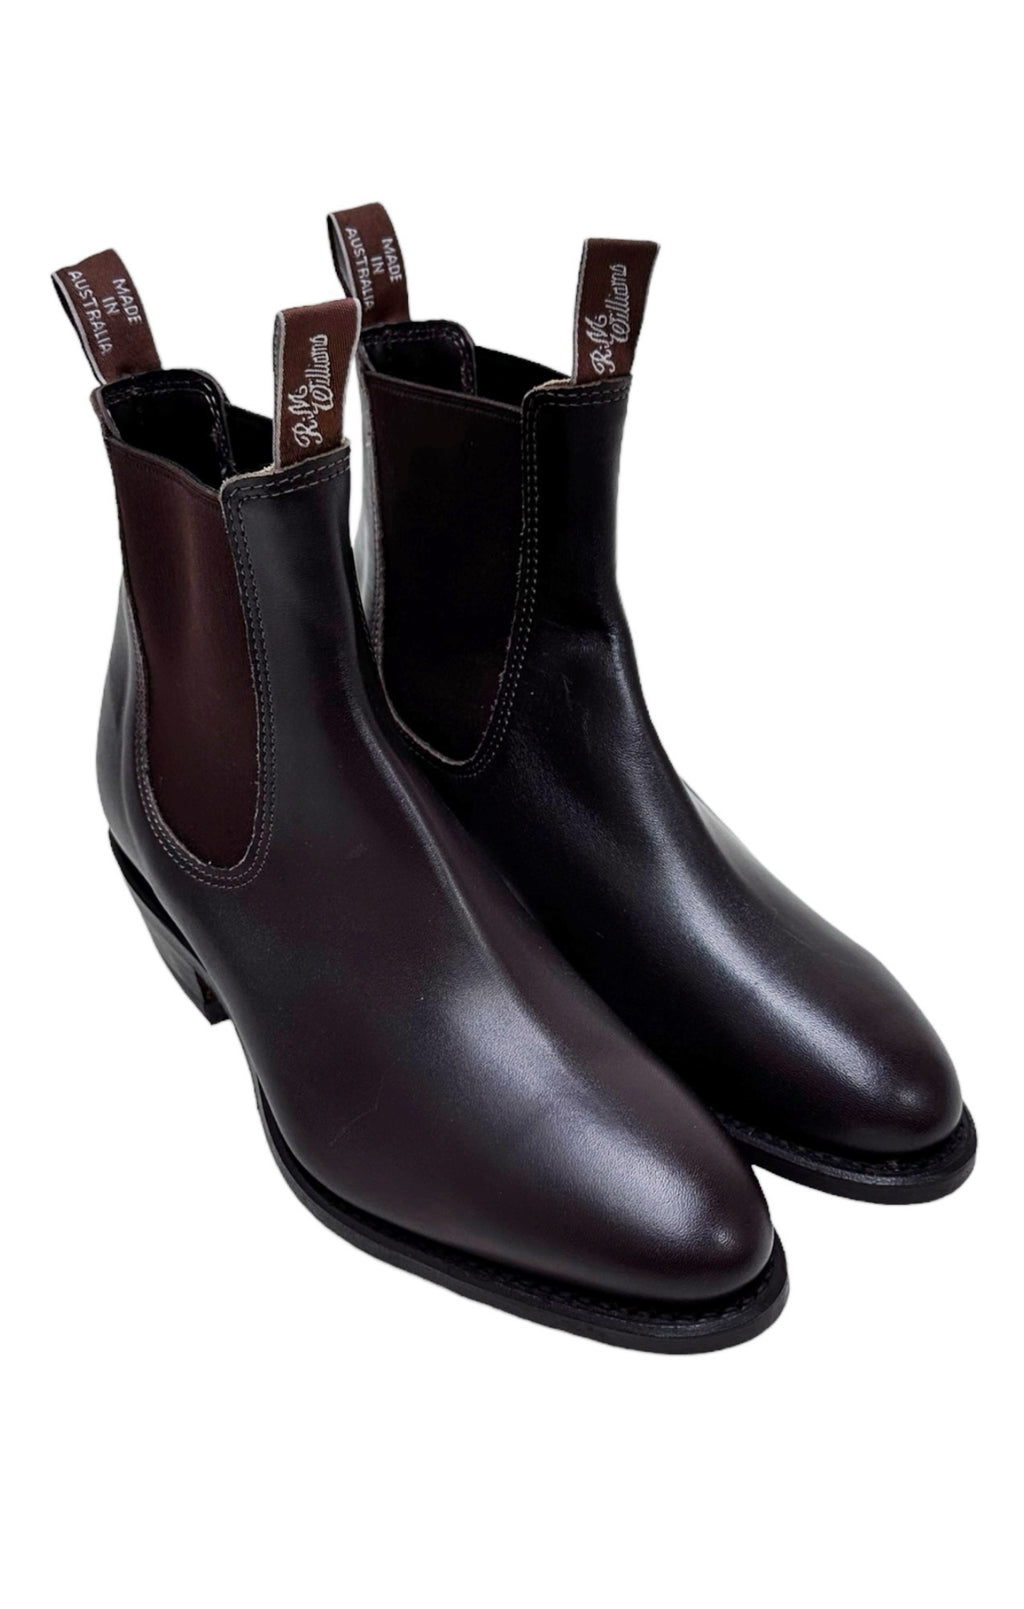 R.M. WILLIAMS (NEW) Boots Size: US 9